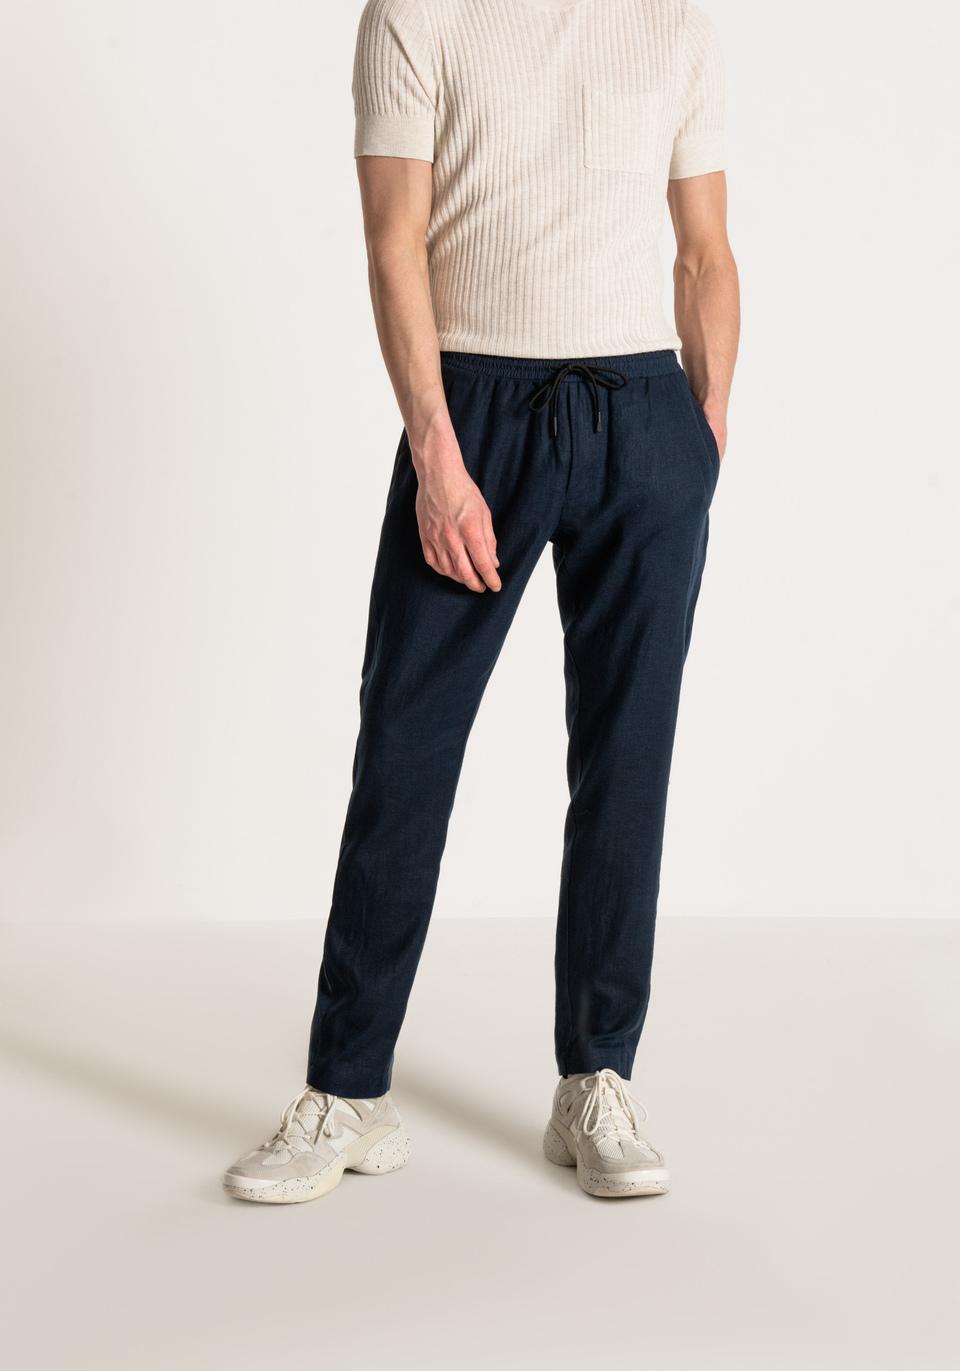 CARROT-FIT TROUSERS IN A LINEN-VISCOSE BLEND WITH TONAL SIDE-BAND DETAILING - Antony Morato Online Shop